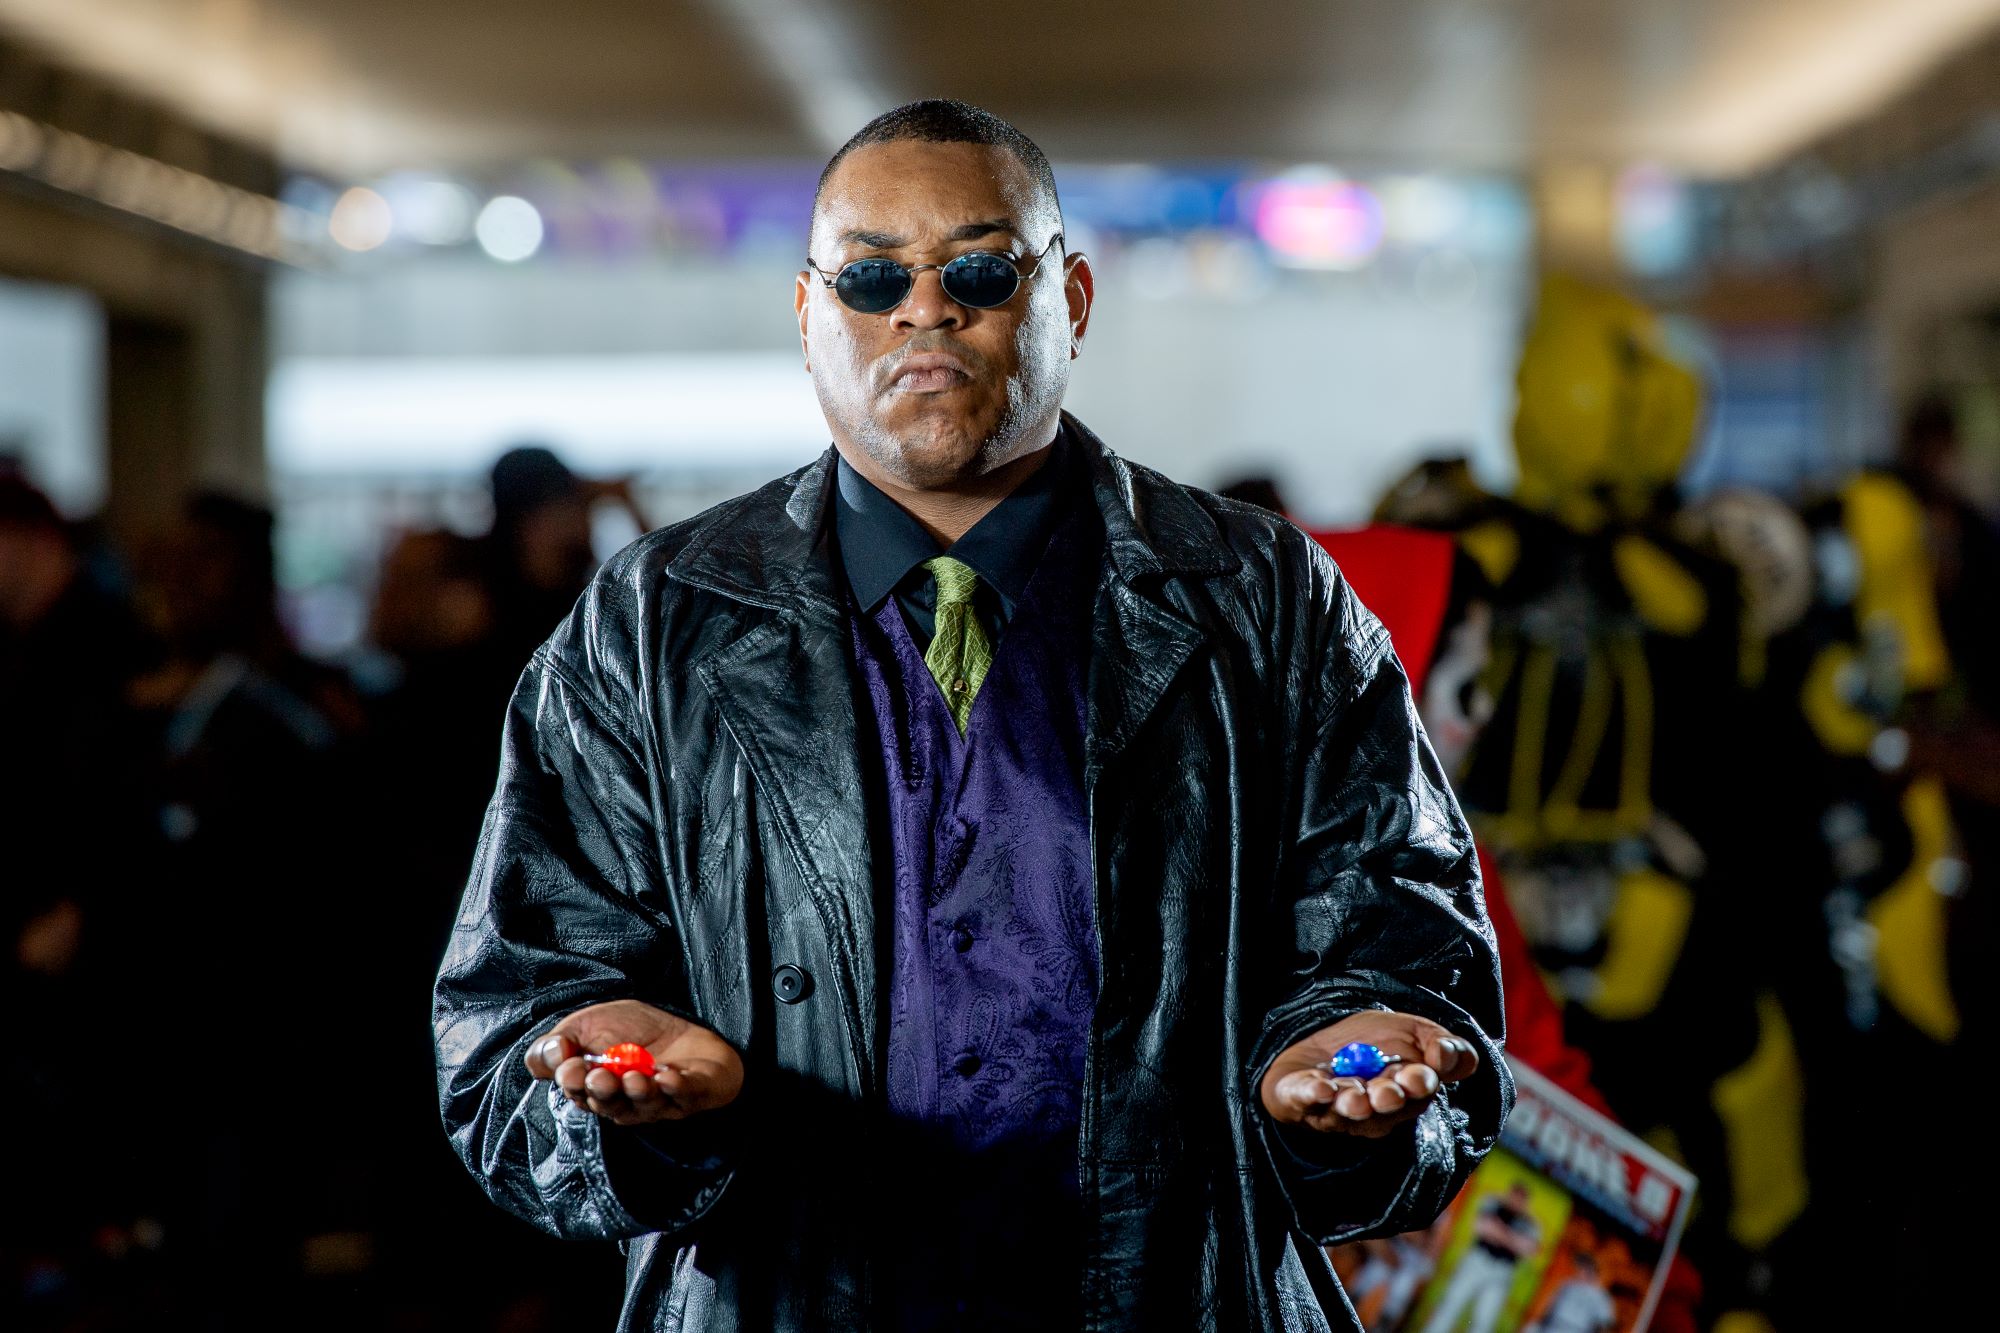 Fan dressed as Morpheus with sunglasses